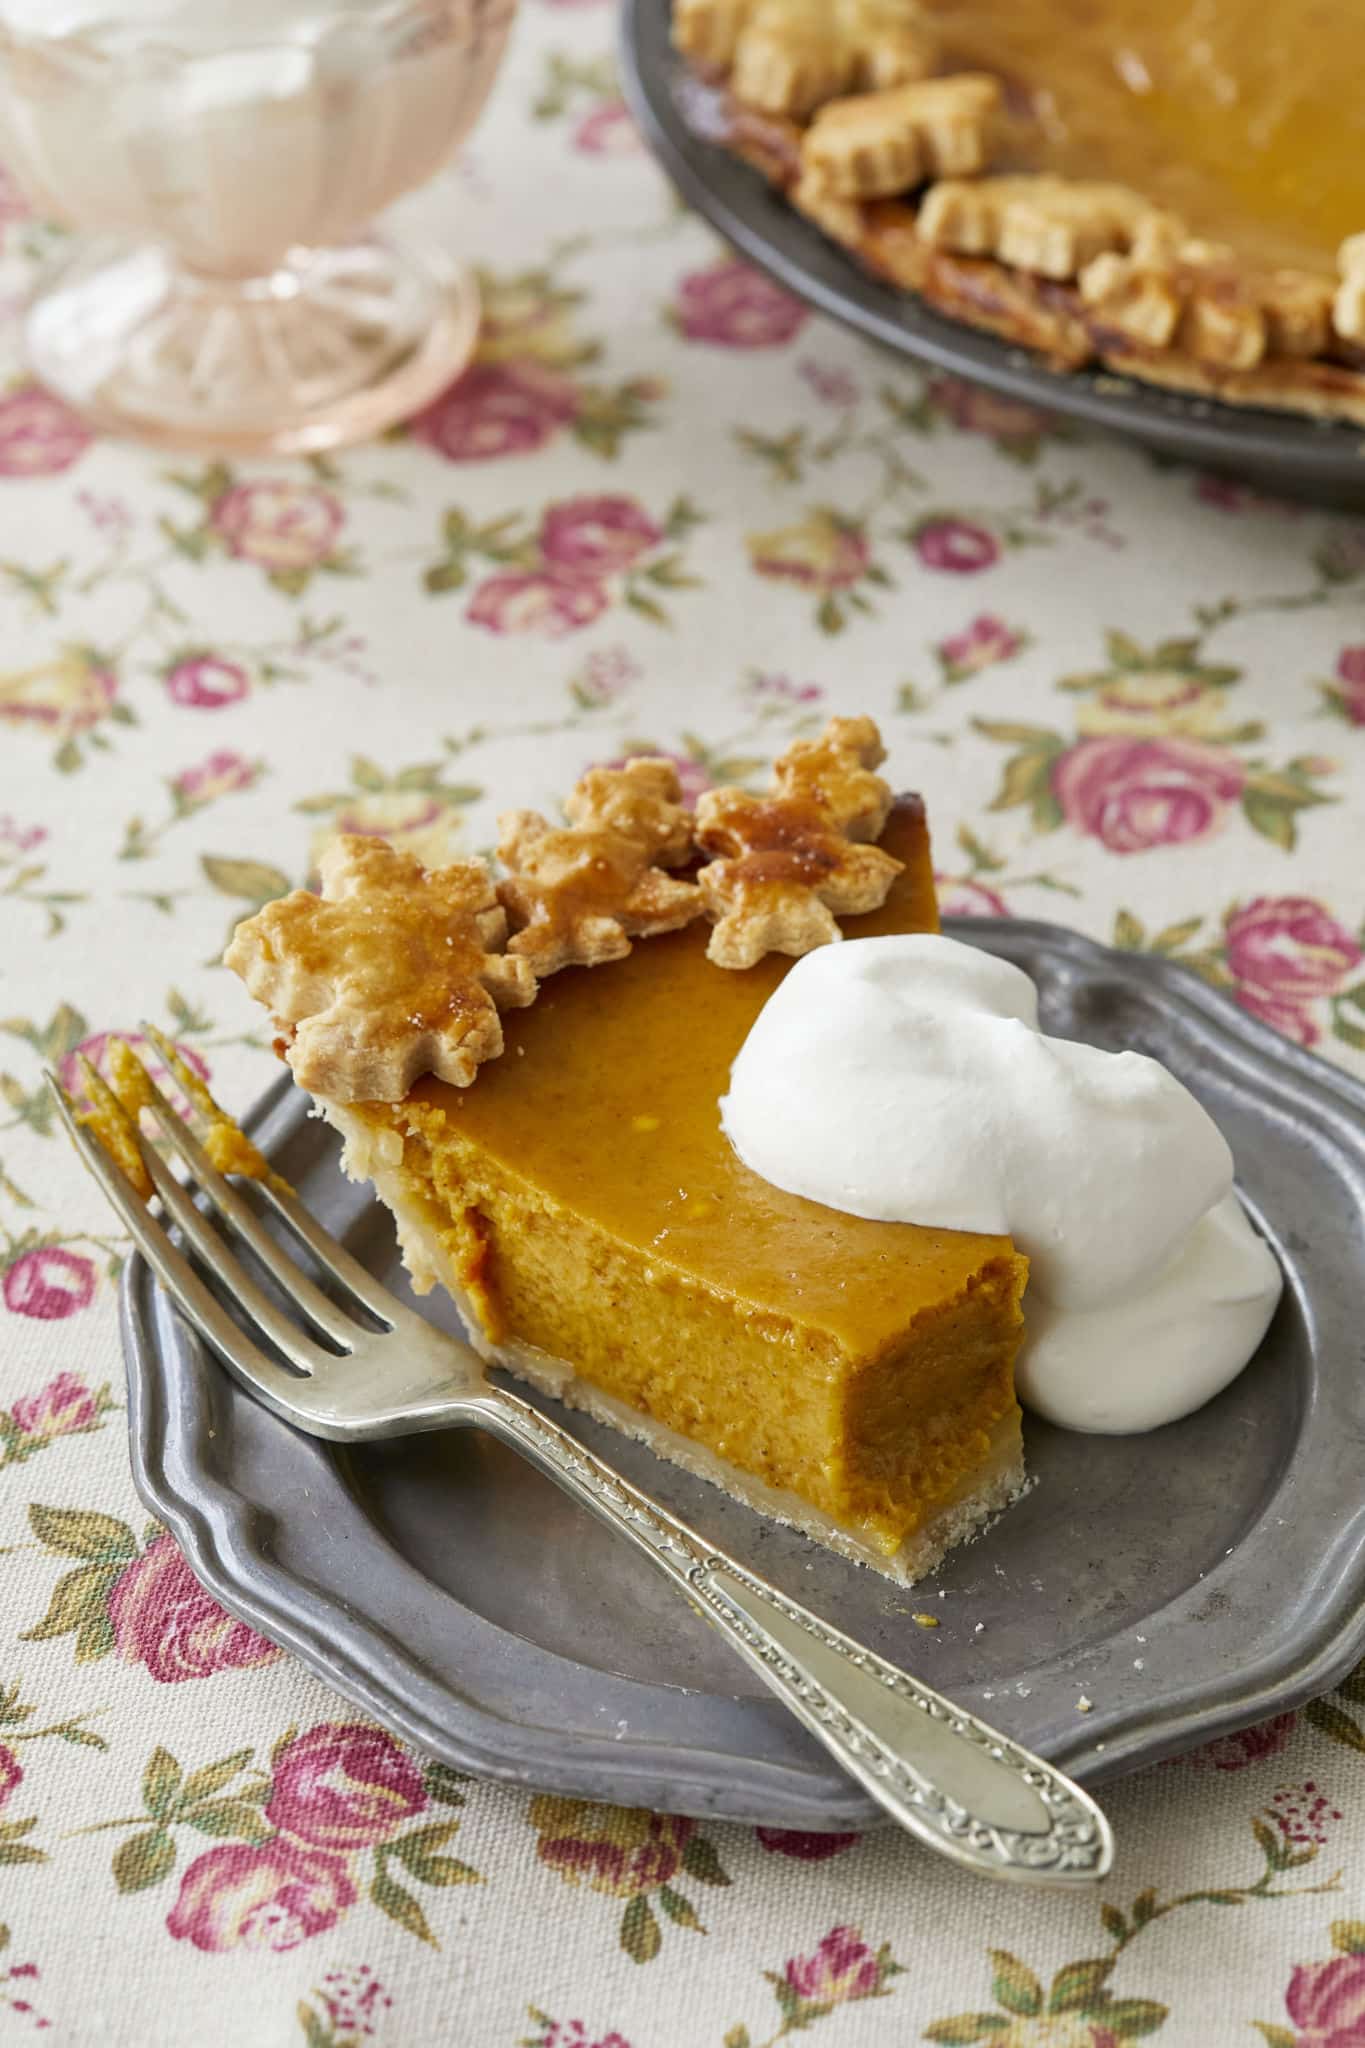 A picture of homemade pumpkin pie with homemade whipped cream is served on a silver dish; a bite has been taken from the tip of the pie.